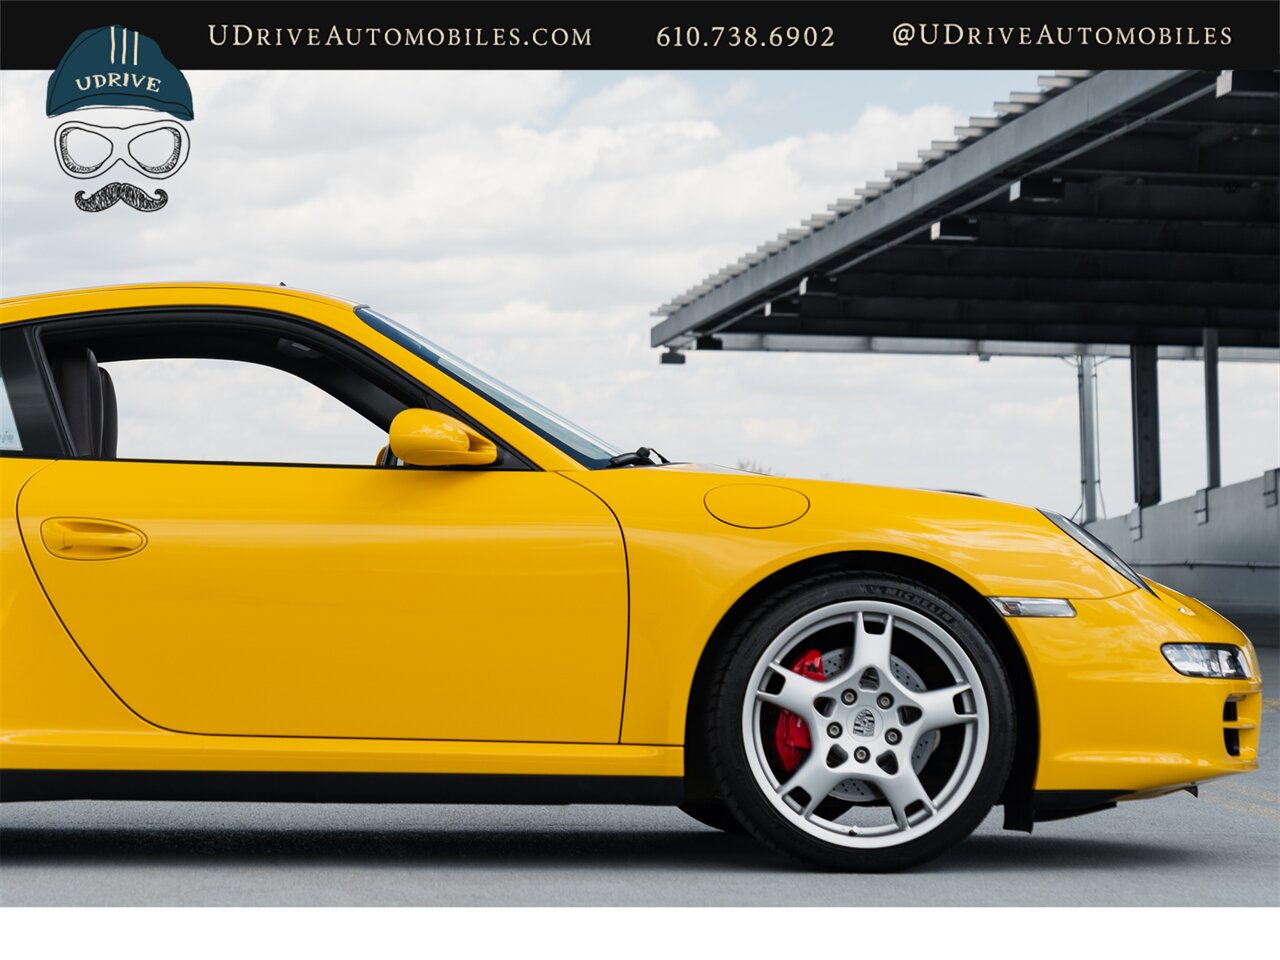 2006 Porsche 911 Carrera 4S  997 C4S 6 Speed Cocoa Full Lthr Chrono Sport Exhaust Special Color Combo - Photo 16 - West Chester, PA 19382